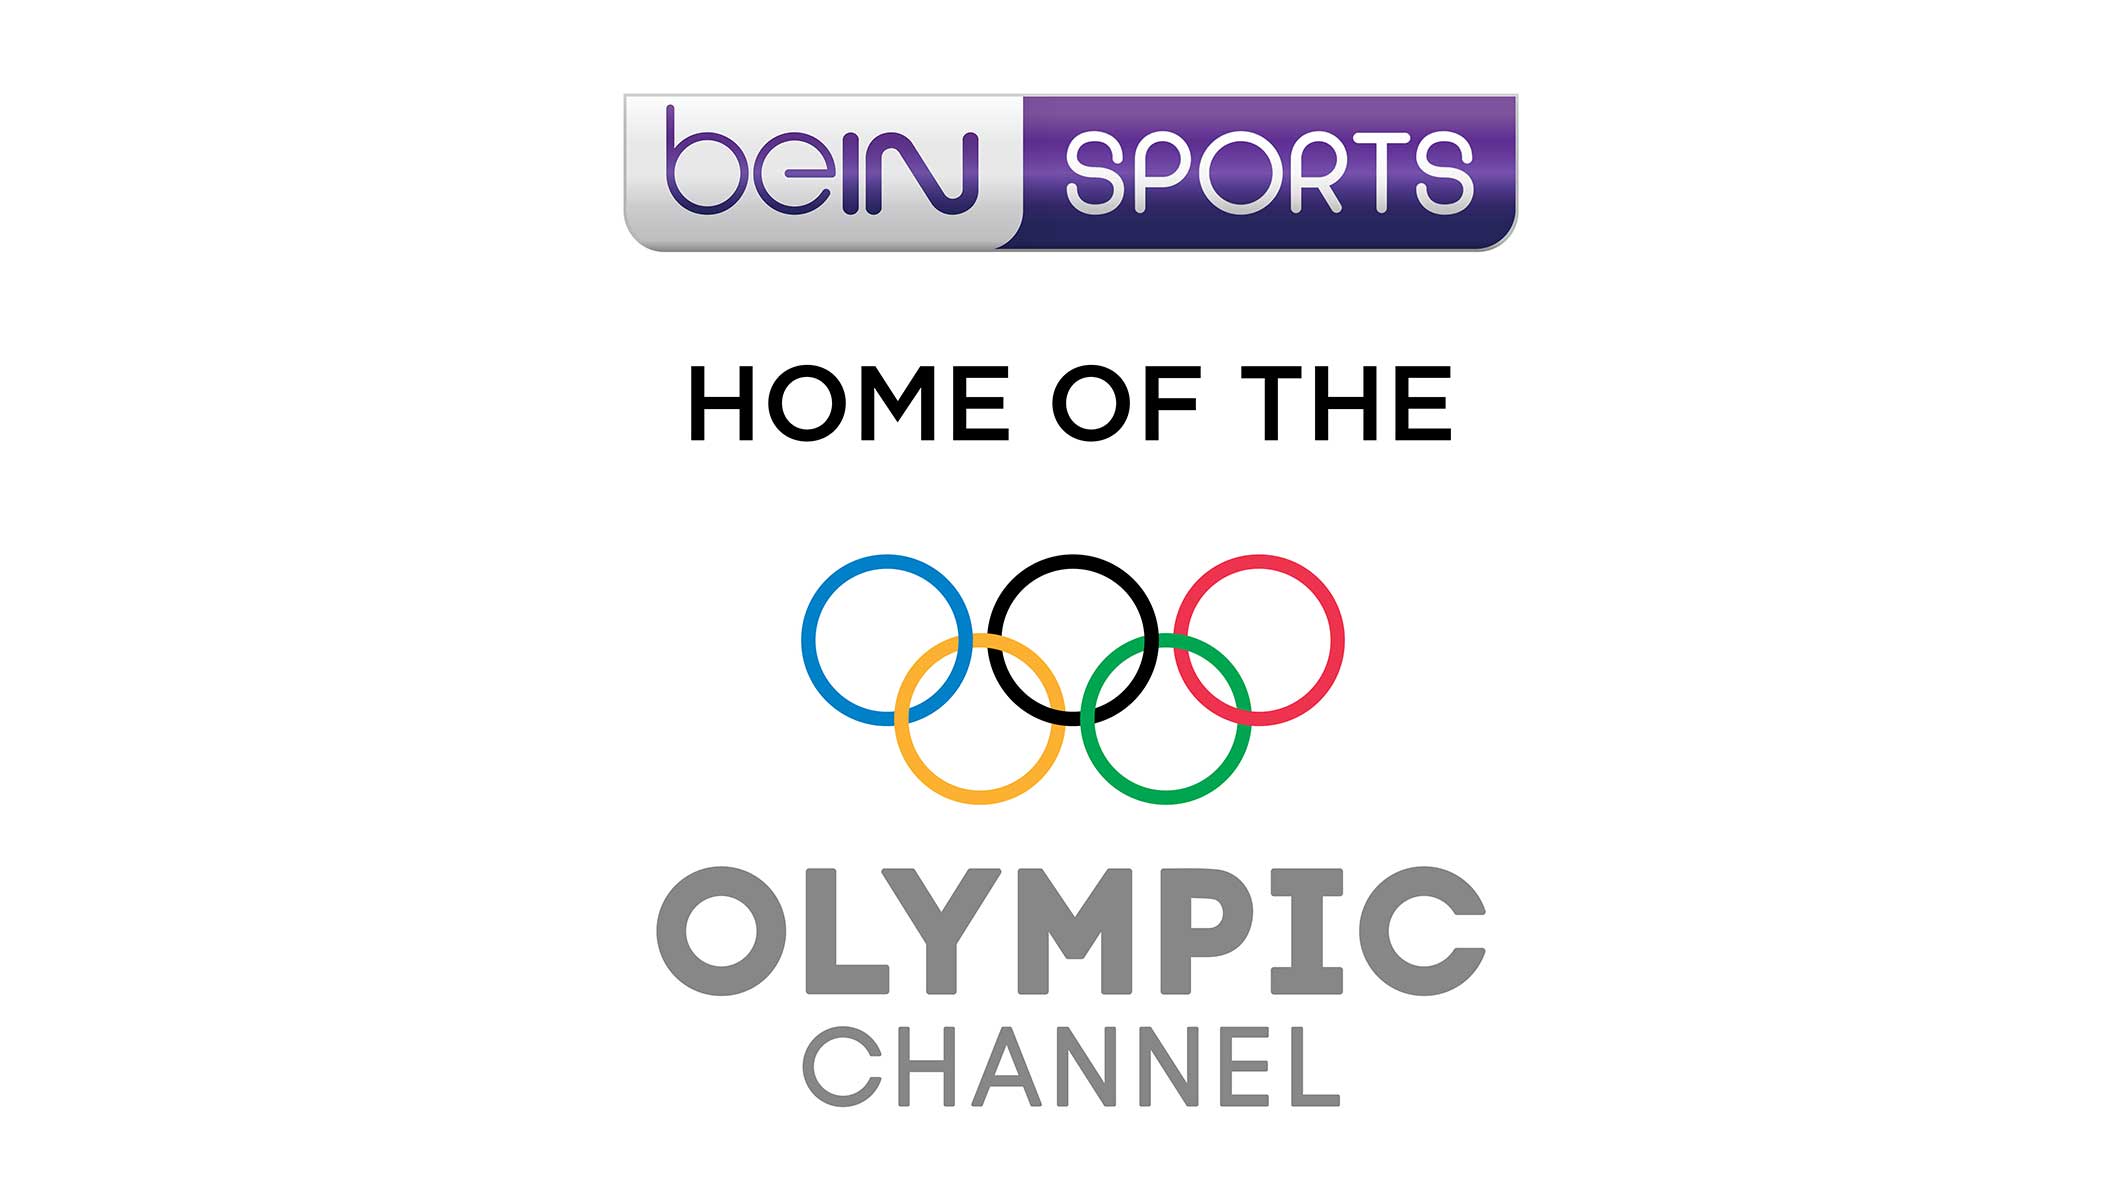 Olympic Channel and beIN MEDIA GROUP Announce Partnership